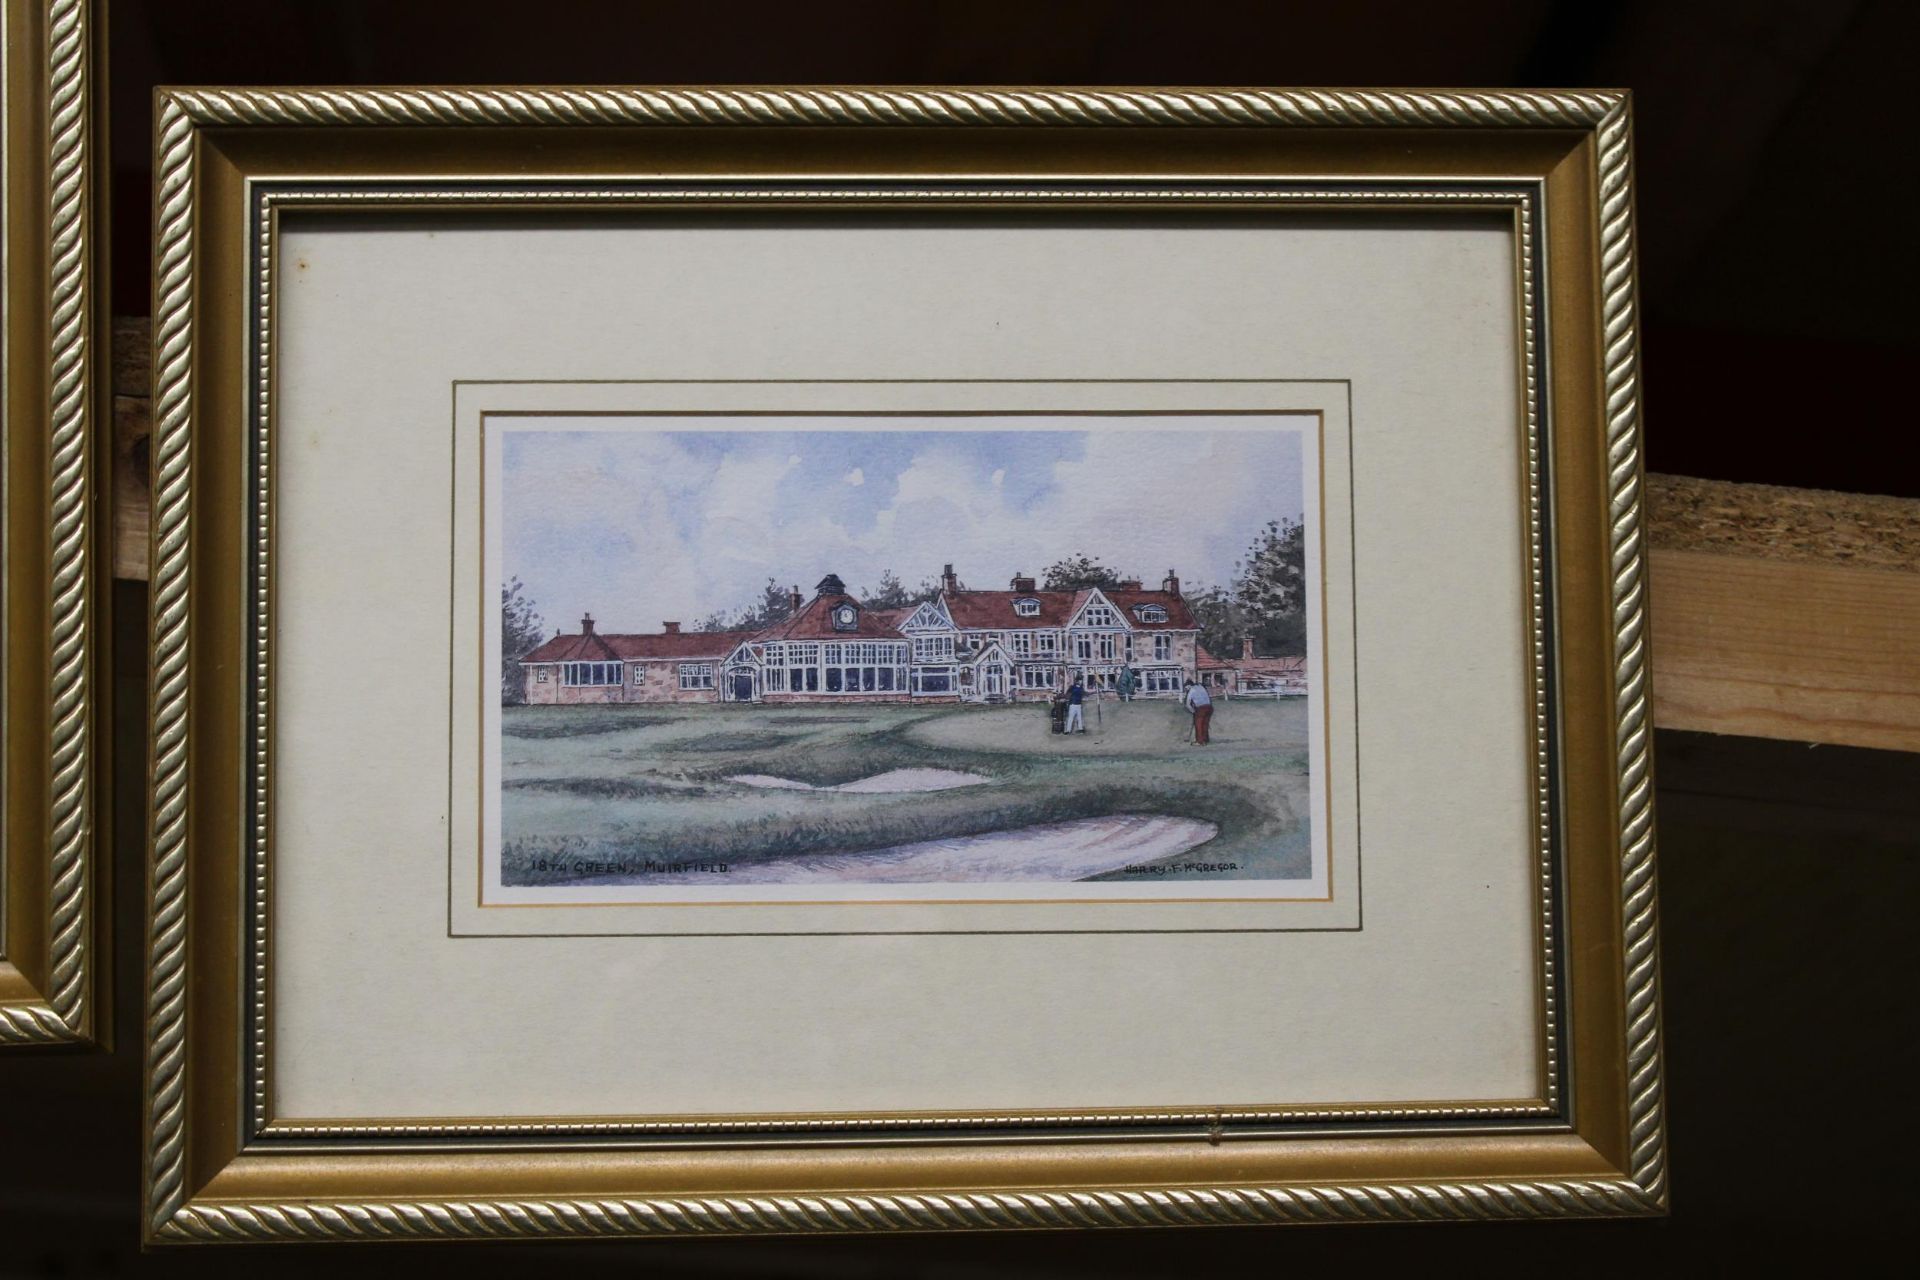 THREE FRAMED PRINTS OF GOLF COURSES TO INCLUDE, GLENEAGLES, ROYAL TROON AND MUIRFIELD - Image 2 of 6